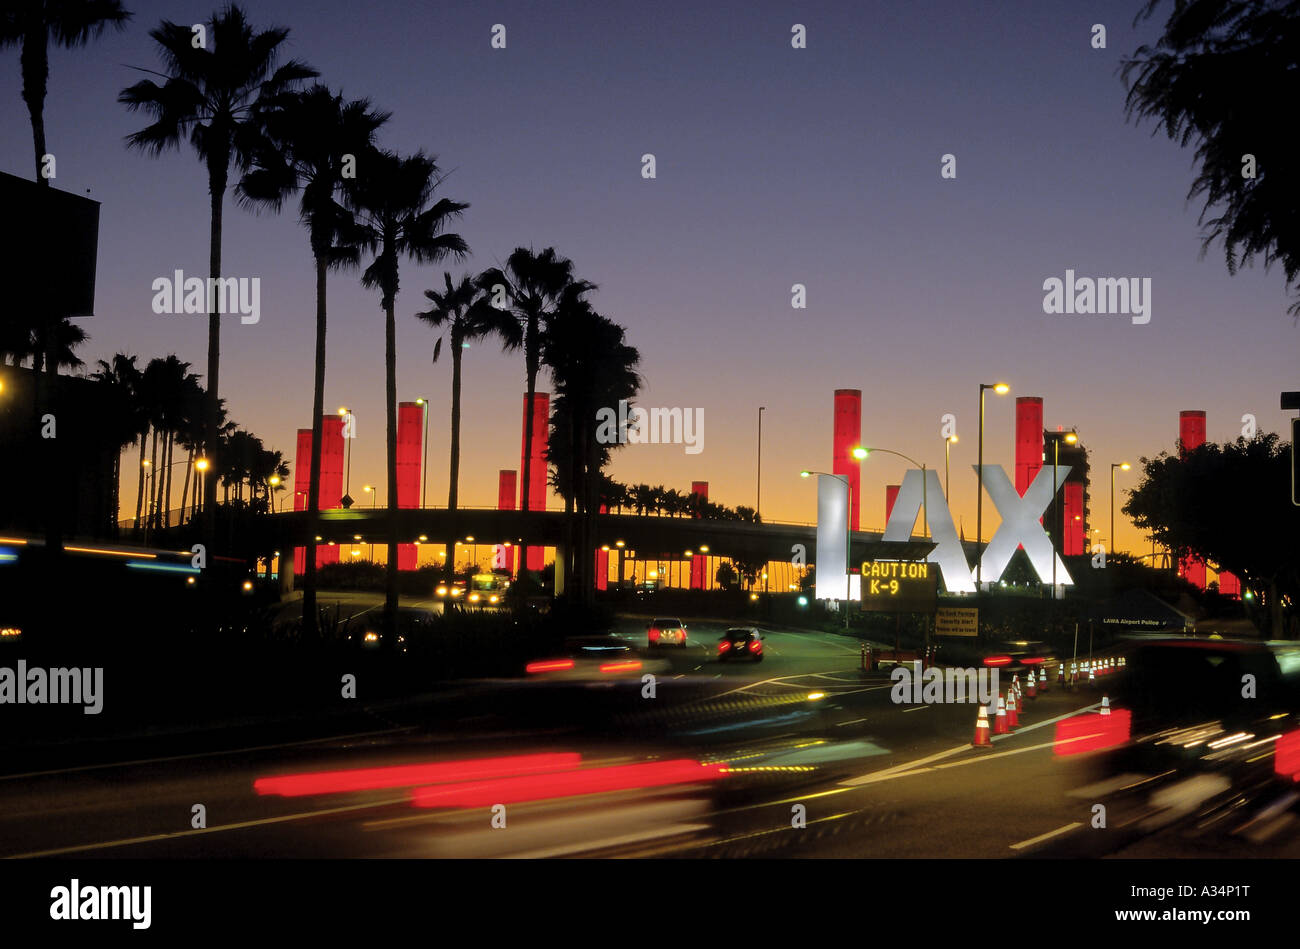 Three large letters confirm arrival at Los Angeles International Airport from Century Boulevard Stock Photo